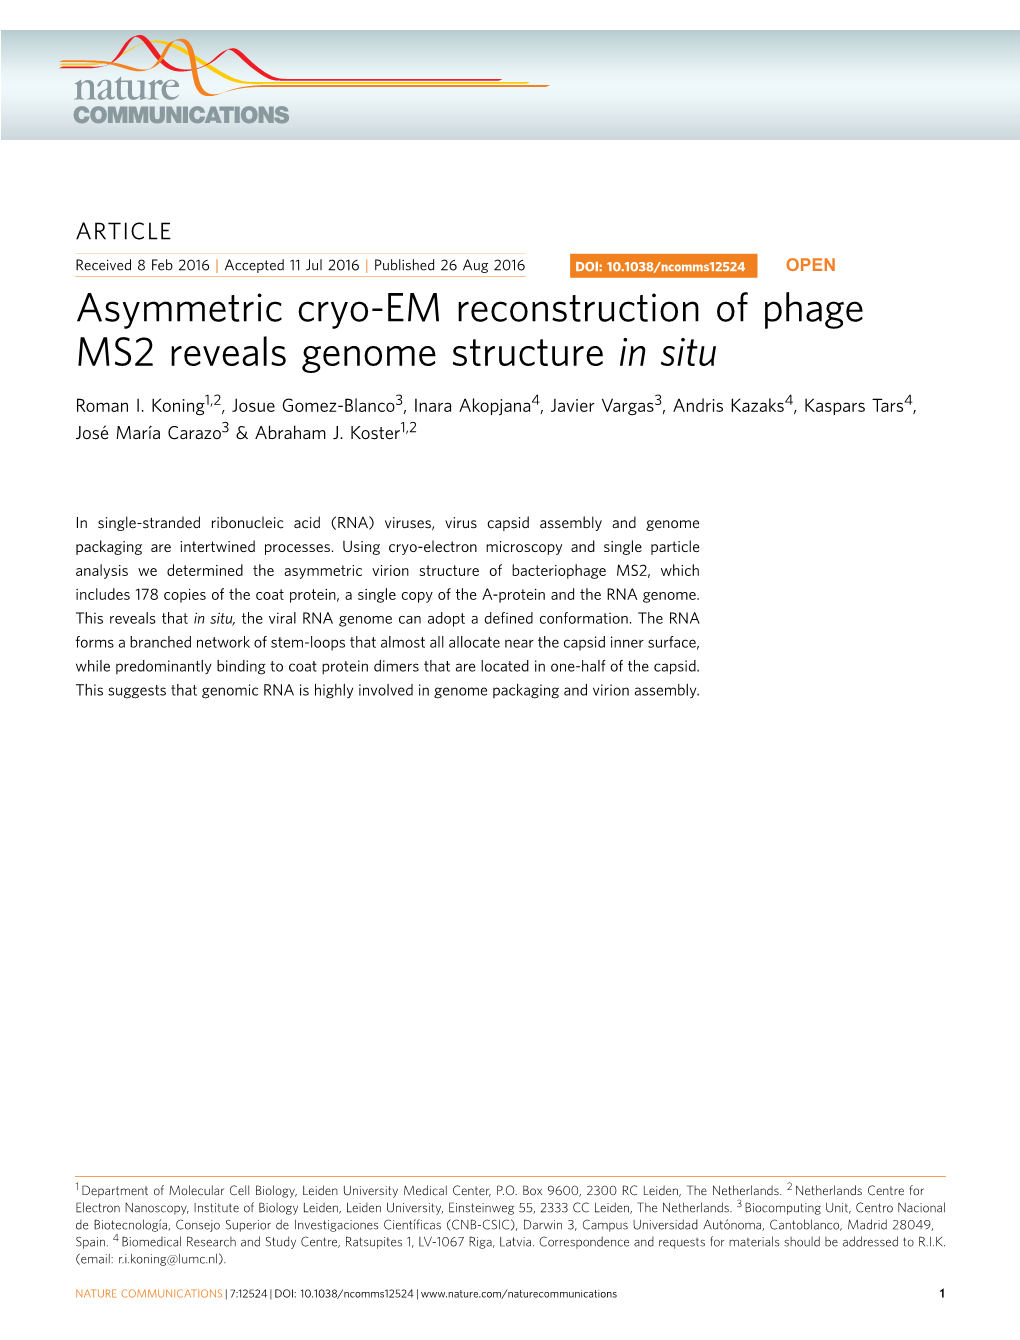 Asymmetric Cryo-EM Reconstruction of Phage MS2 Reveals Genome Structure in Situ